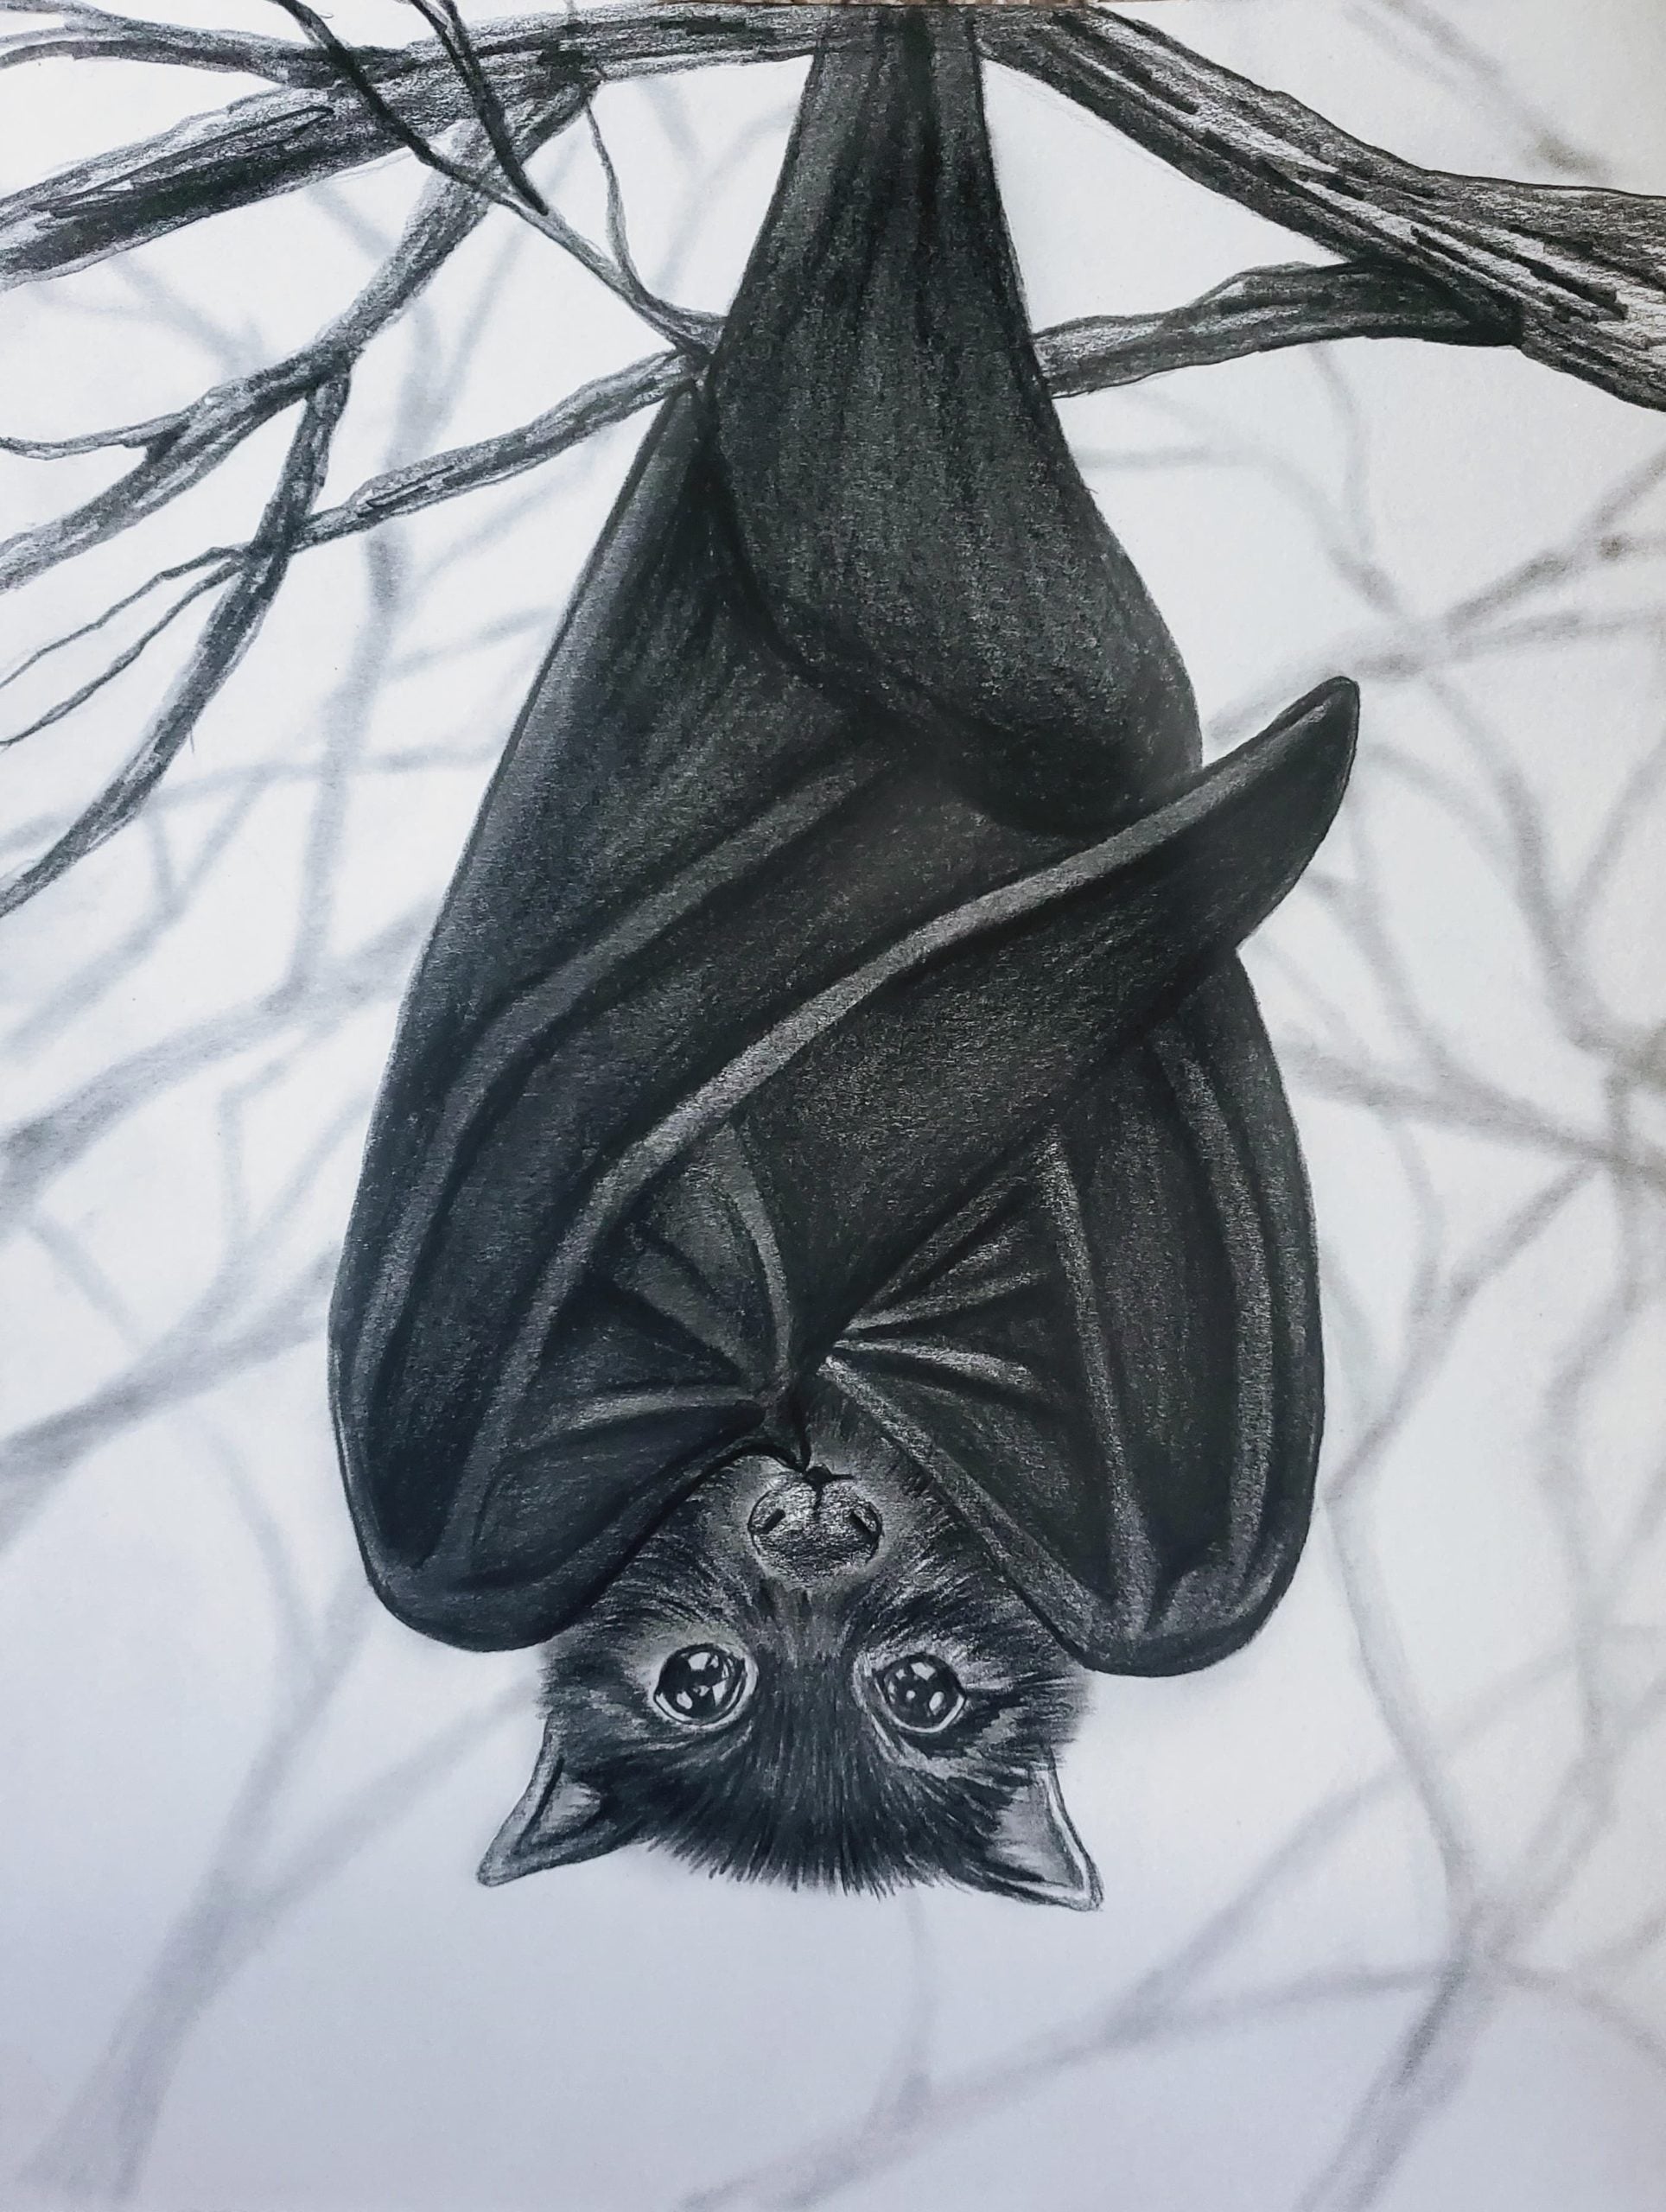 How to draw a bat step by step - Gathered